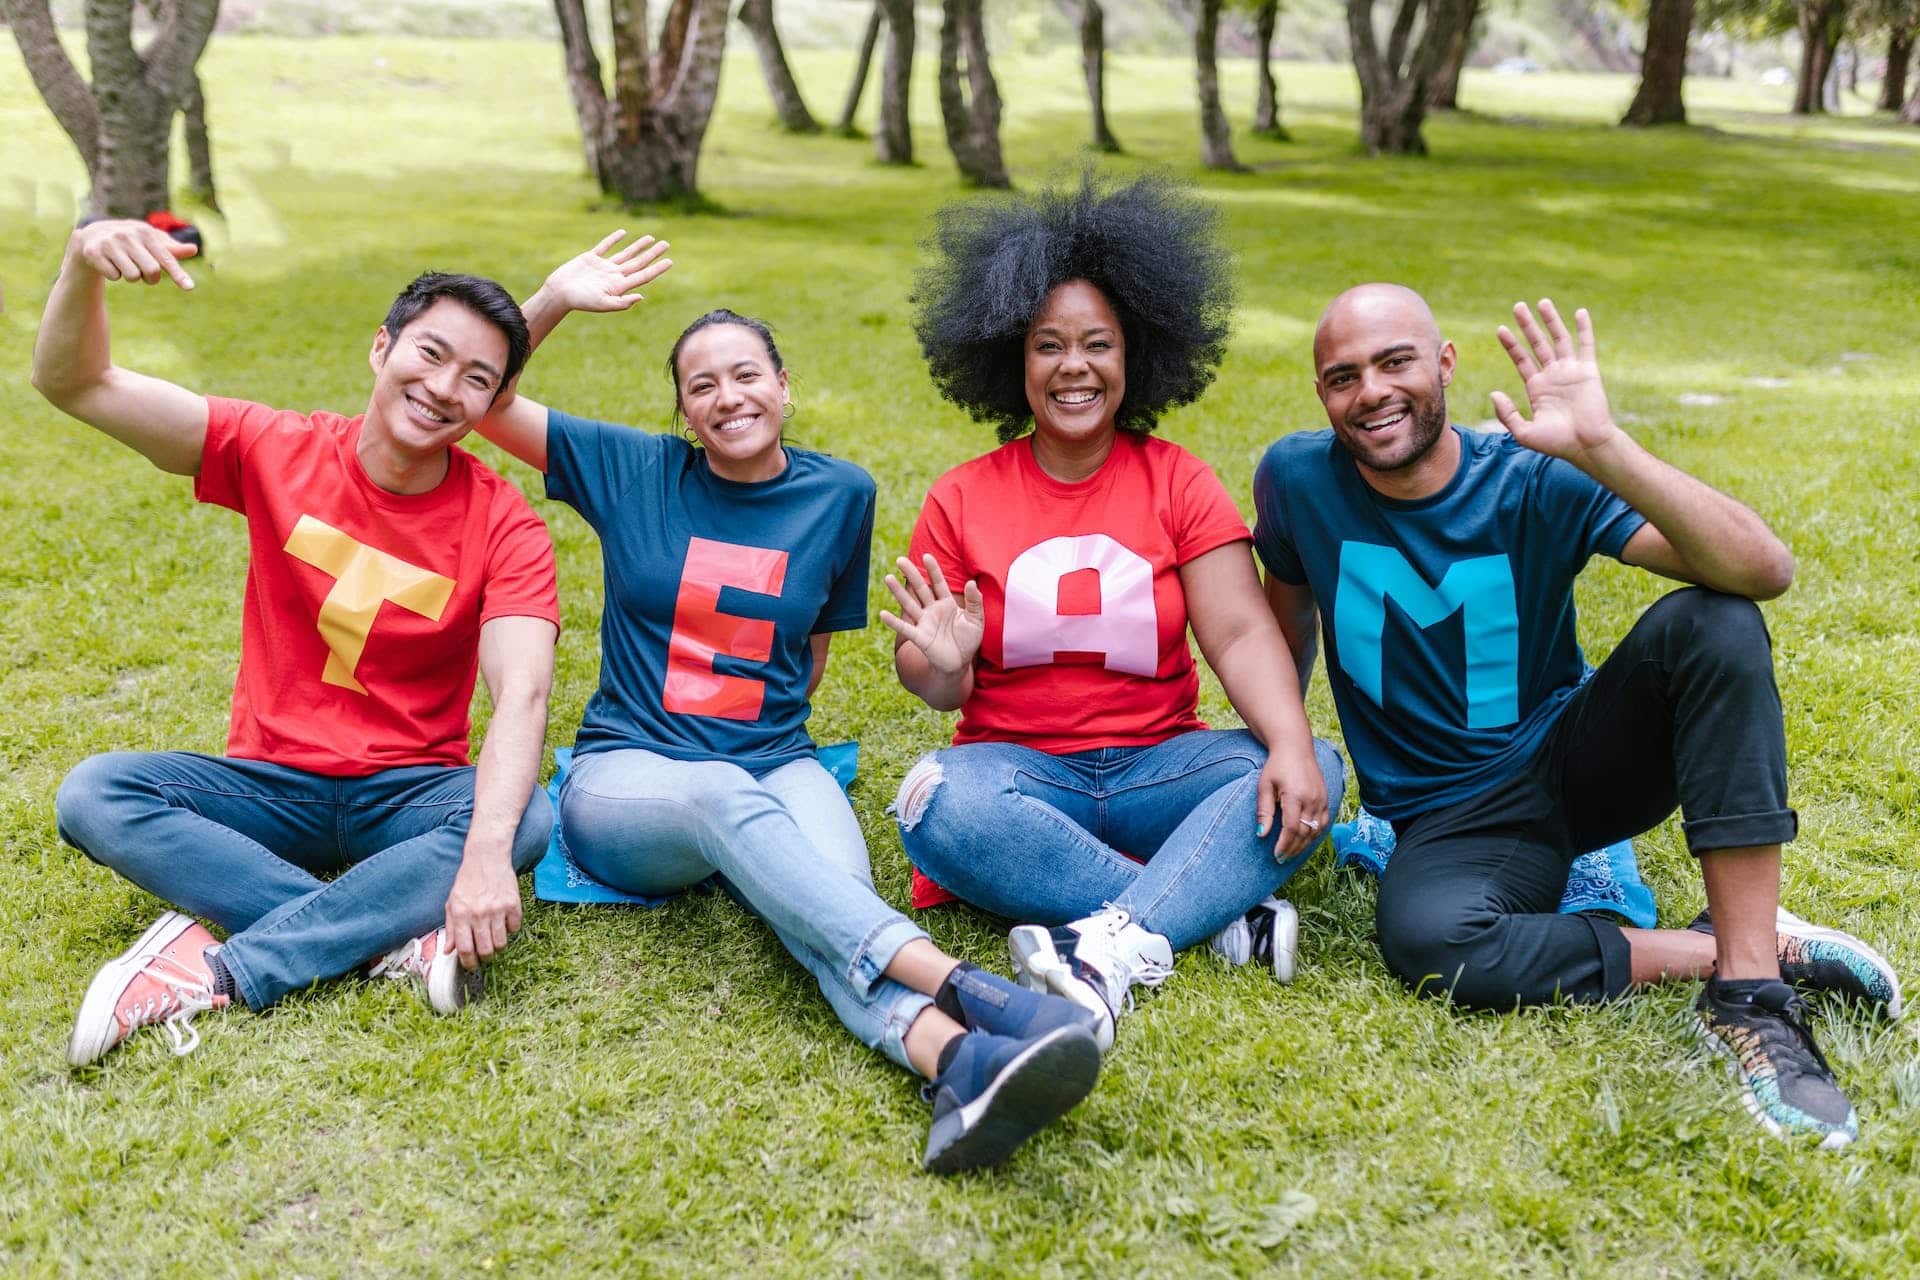 A group of four people sit in a row on a lawn while smiling and waiving. Their shirts spell out TEAM.